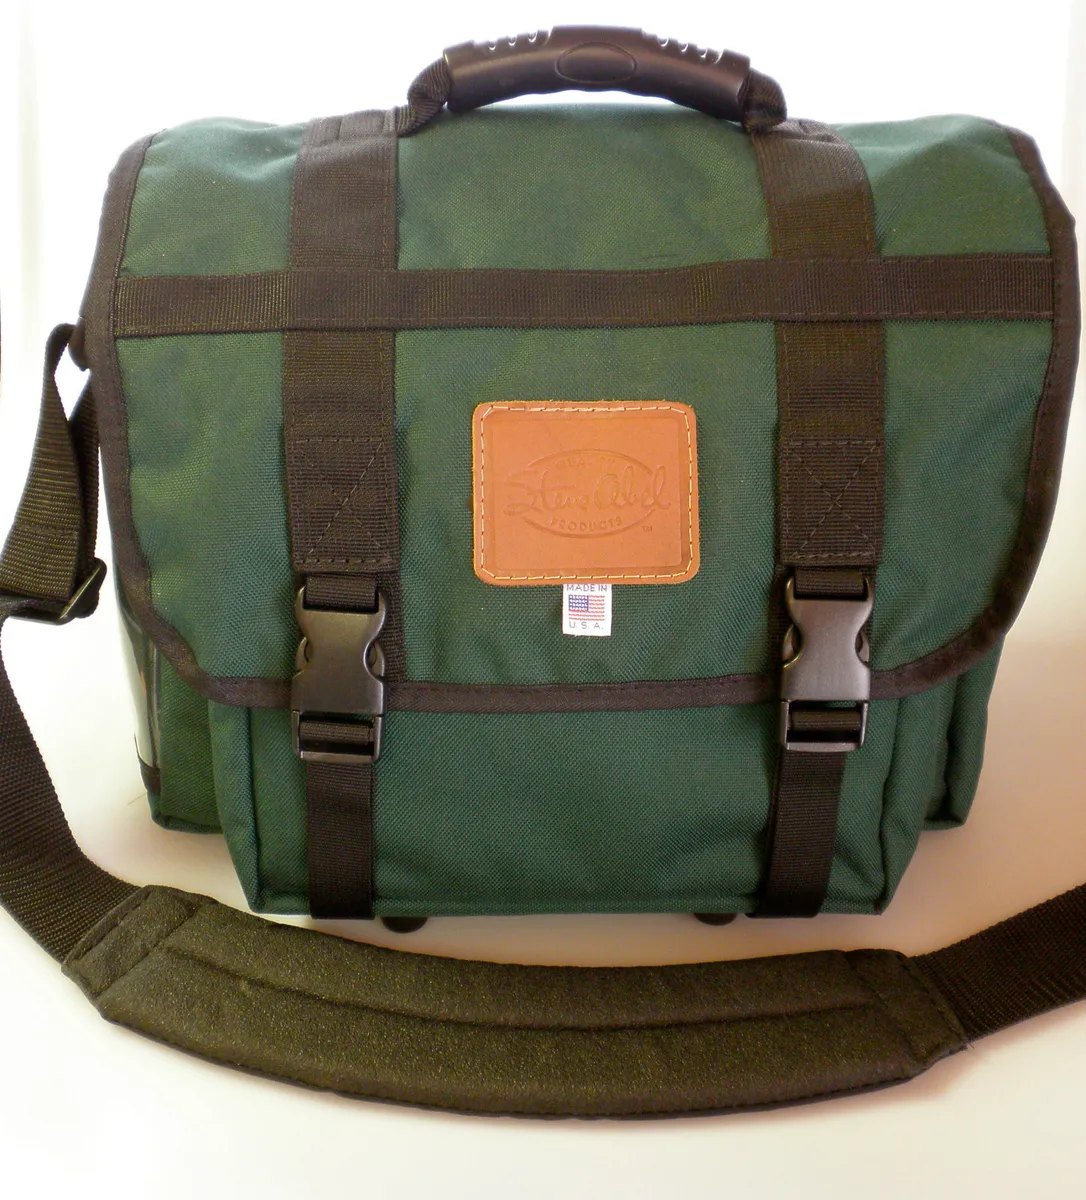 STEVE ABEL FLY FISHING TACKLE BAG & LUGGAGE by the creator of ABEL REELS